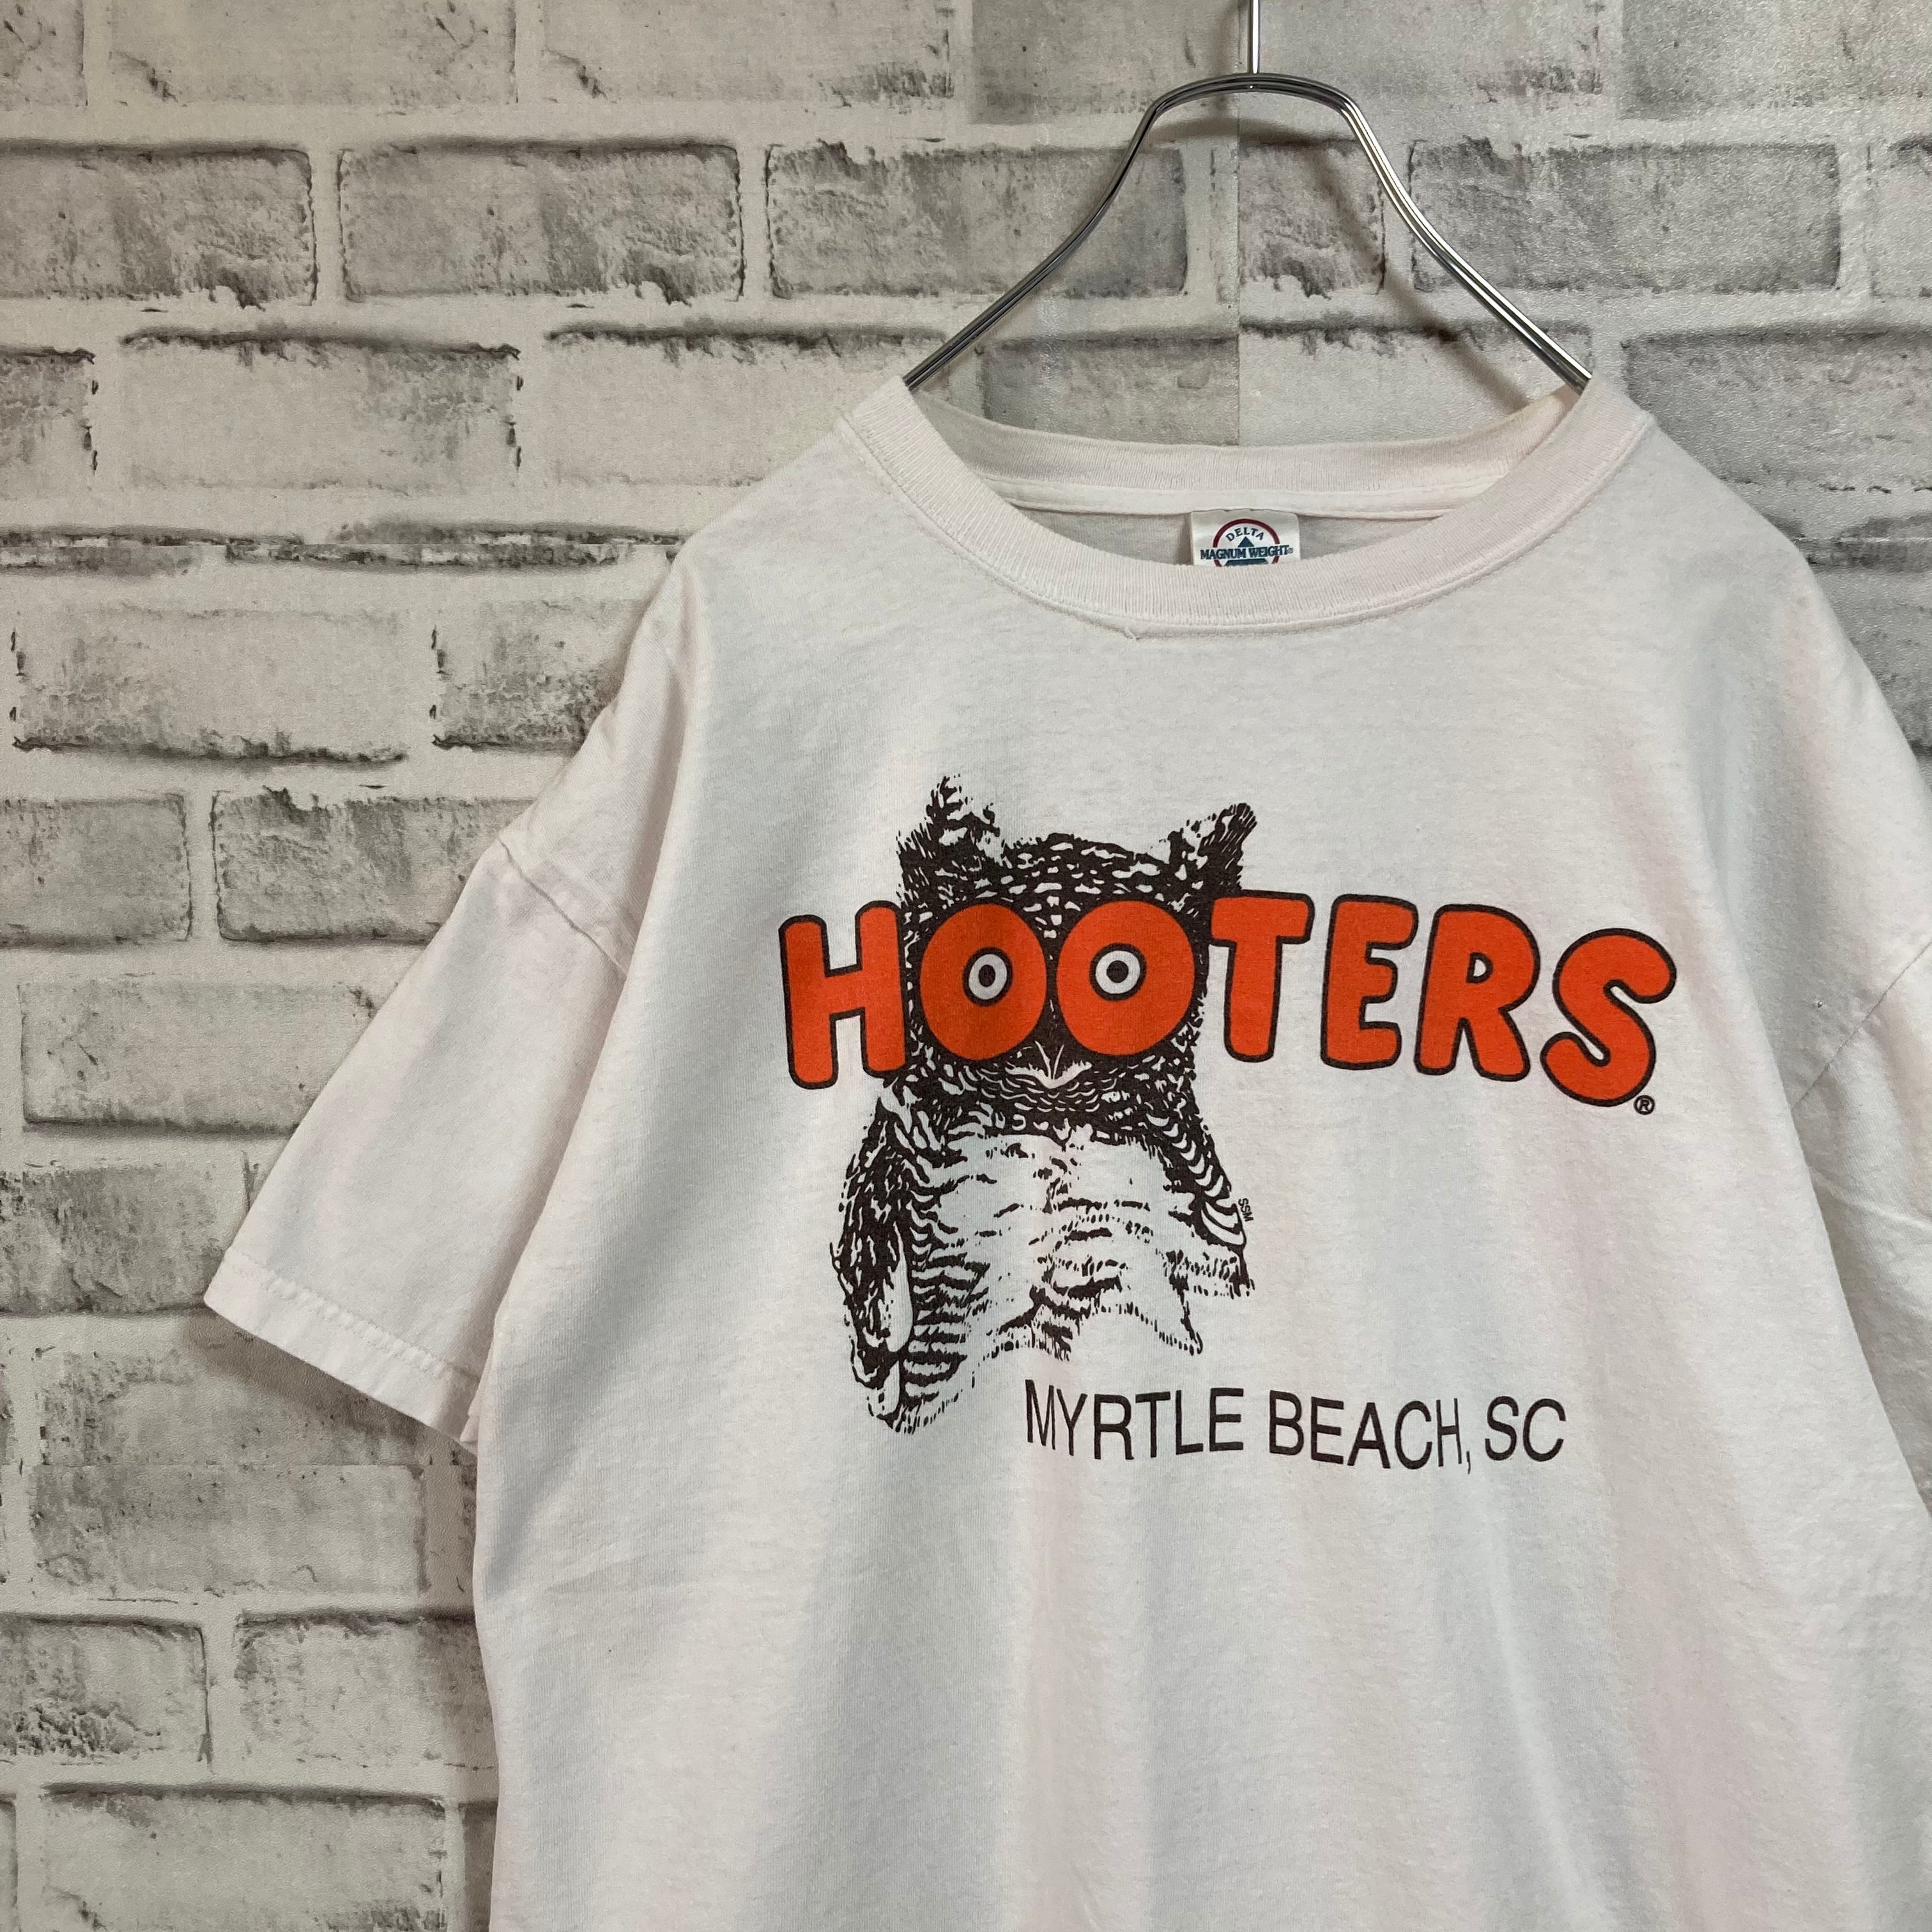 DELTA】S/S Tee L “HOOTERS” バックプリント 両面プリント Tシャツ